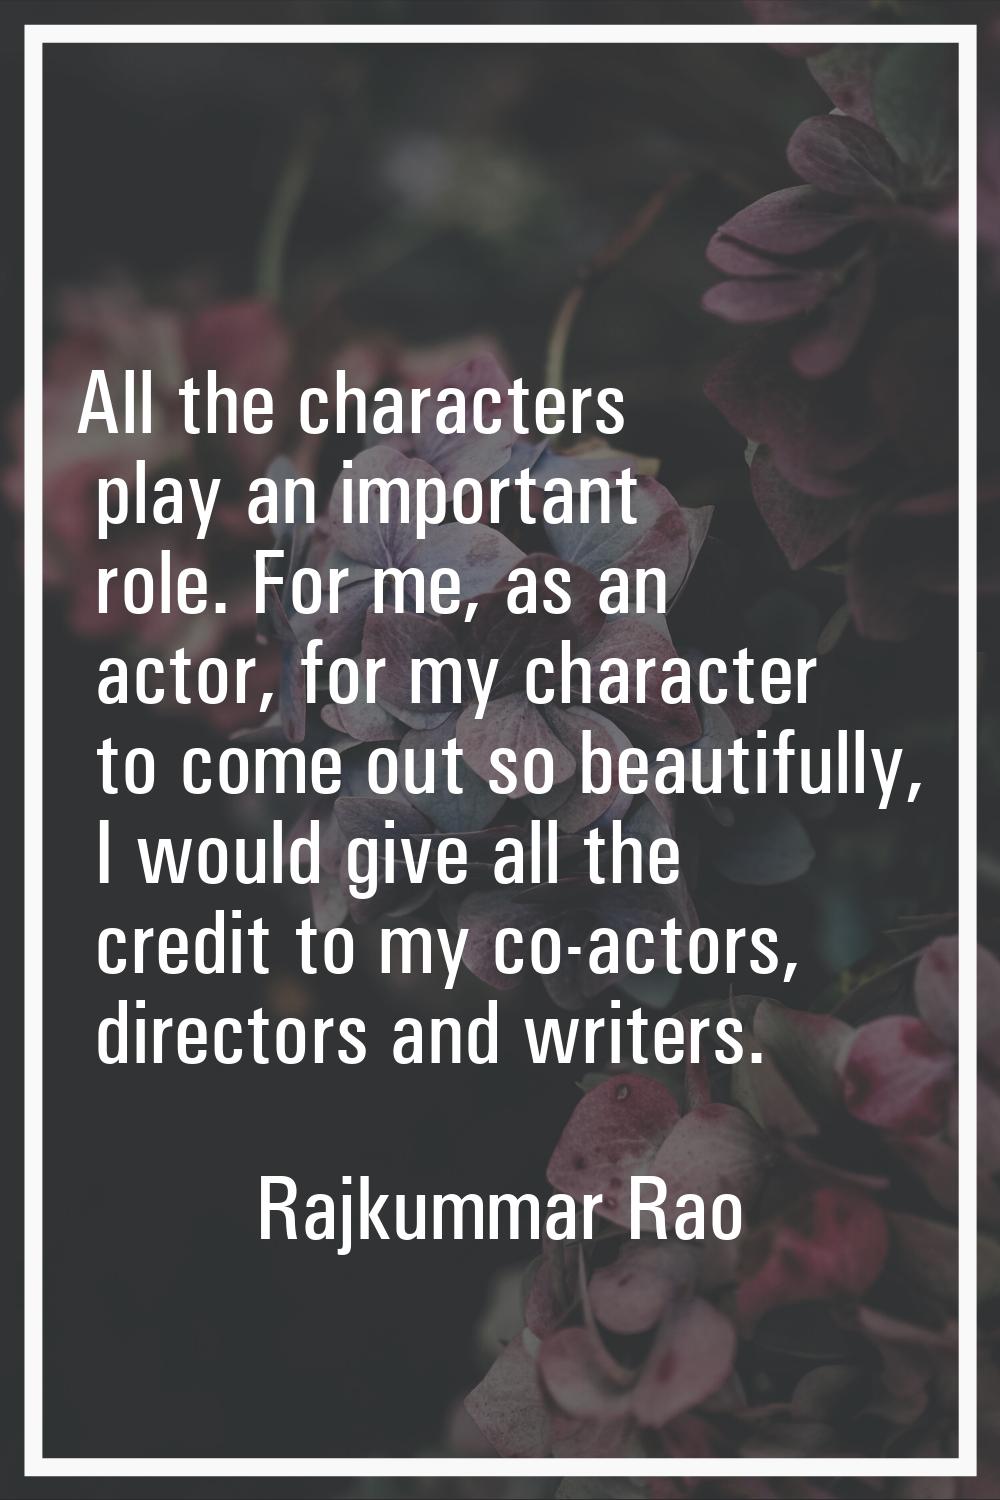 All the characters play an important role. For me, as an actor, for my character to come out so bea